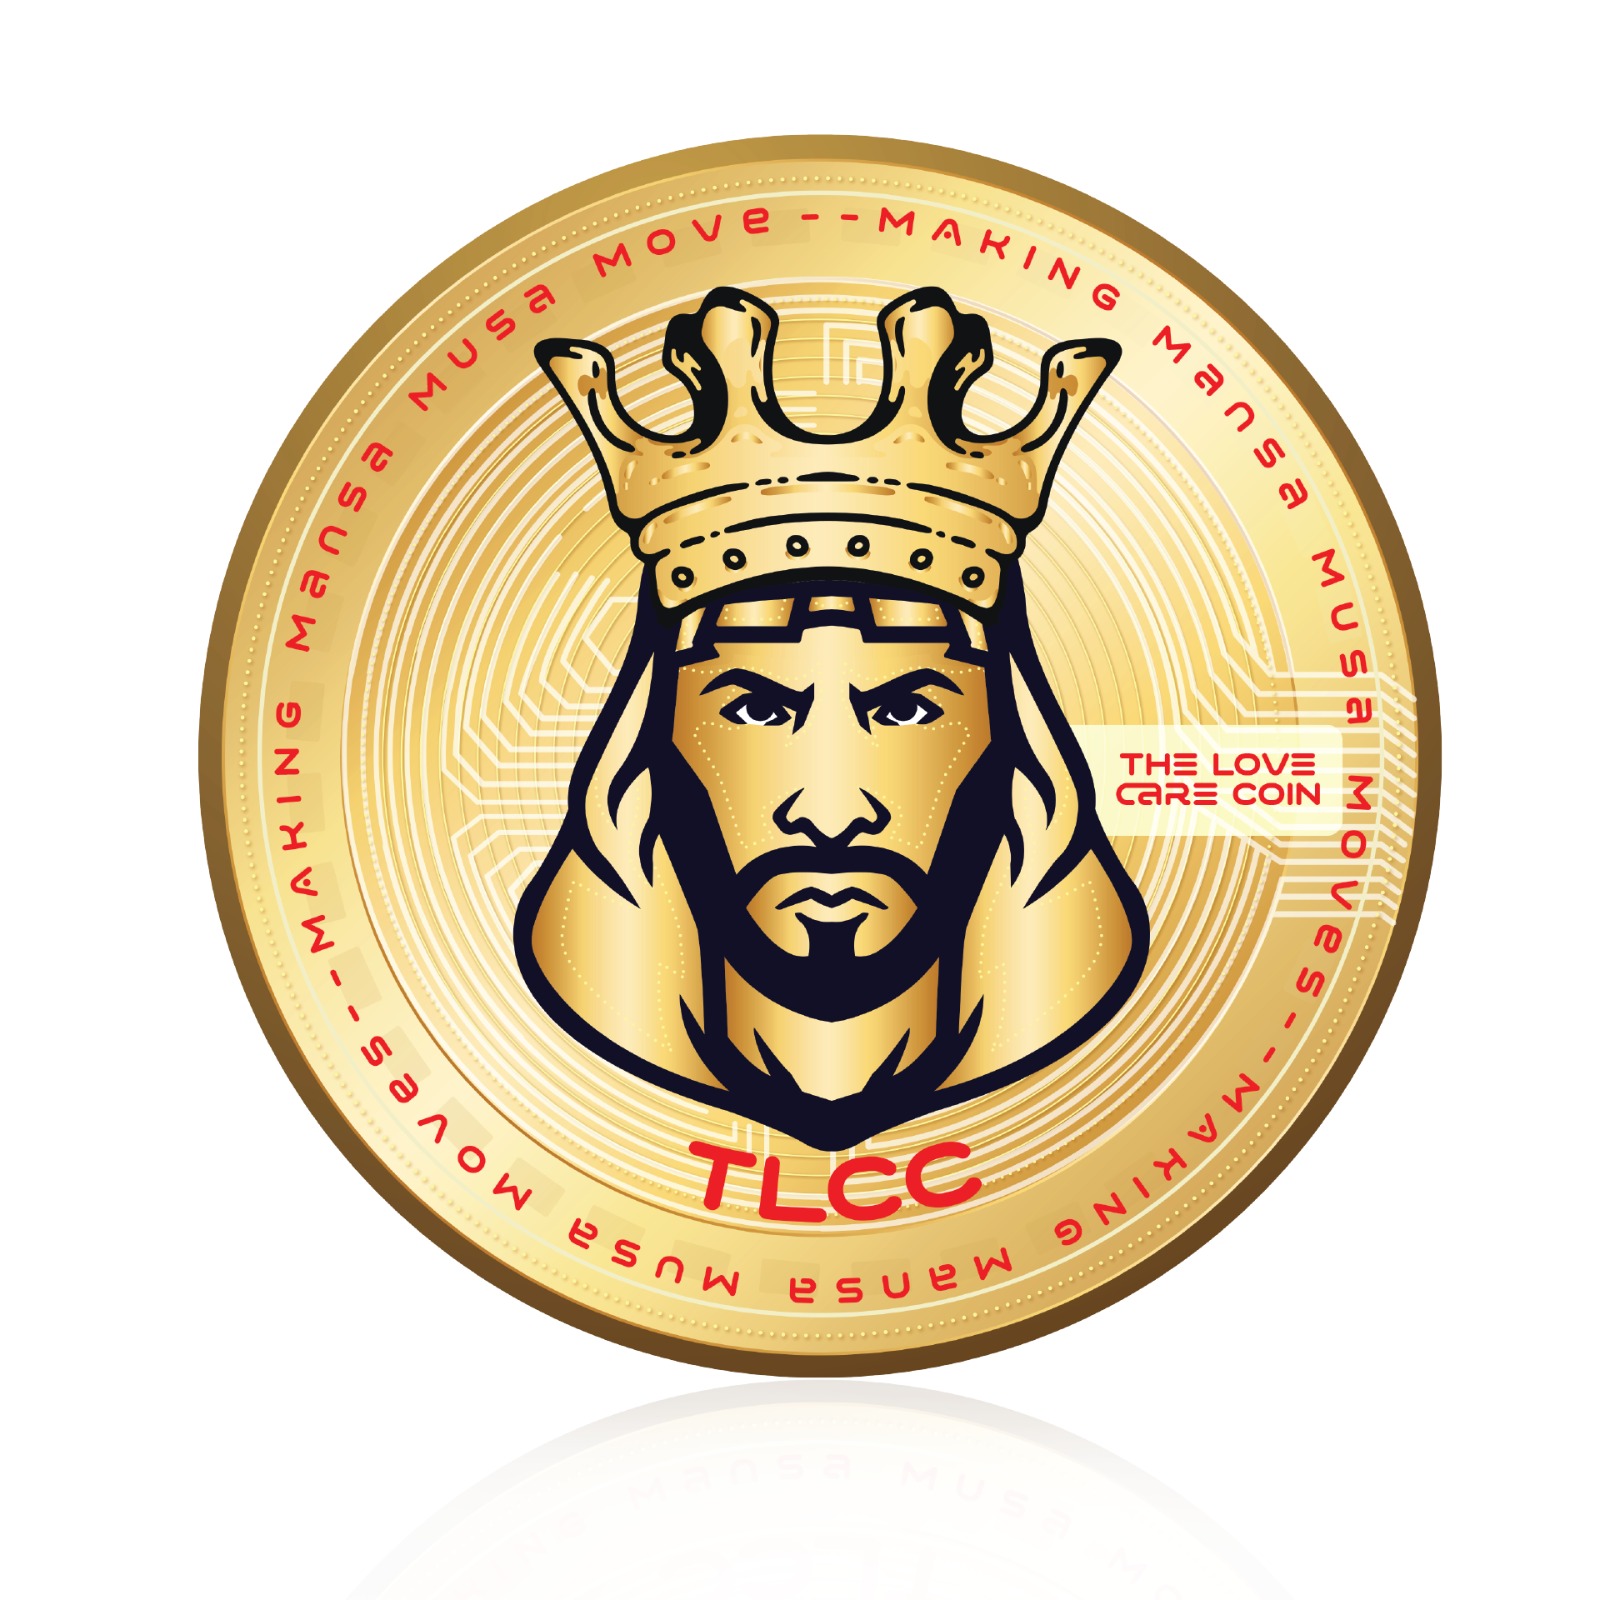 The Love Care Coin TLCC is Making Mansa Musa Moves